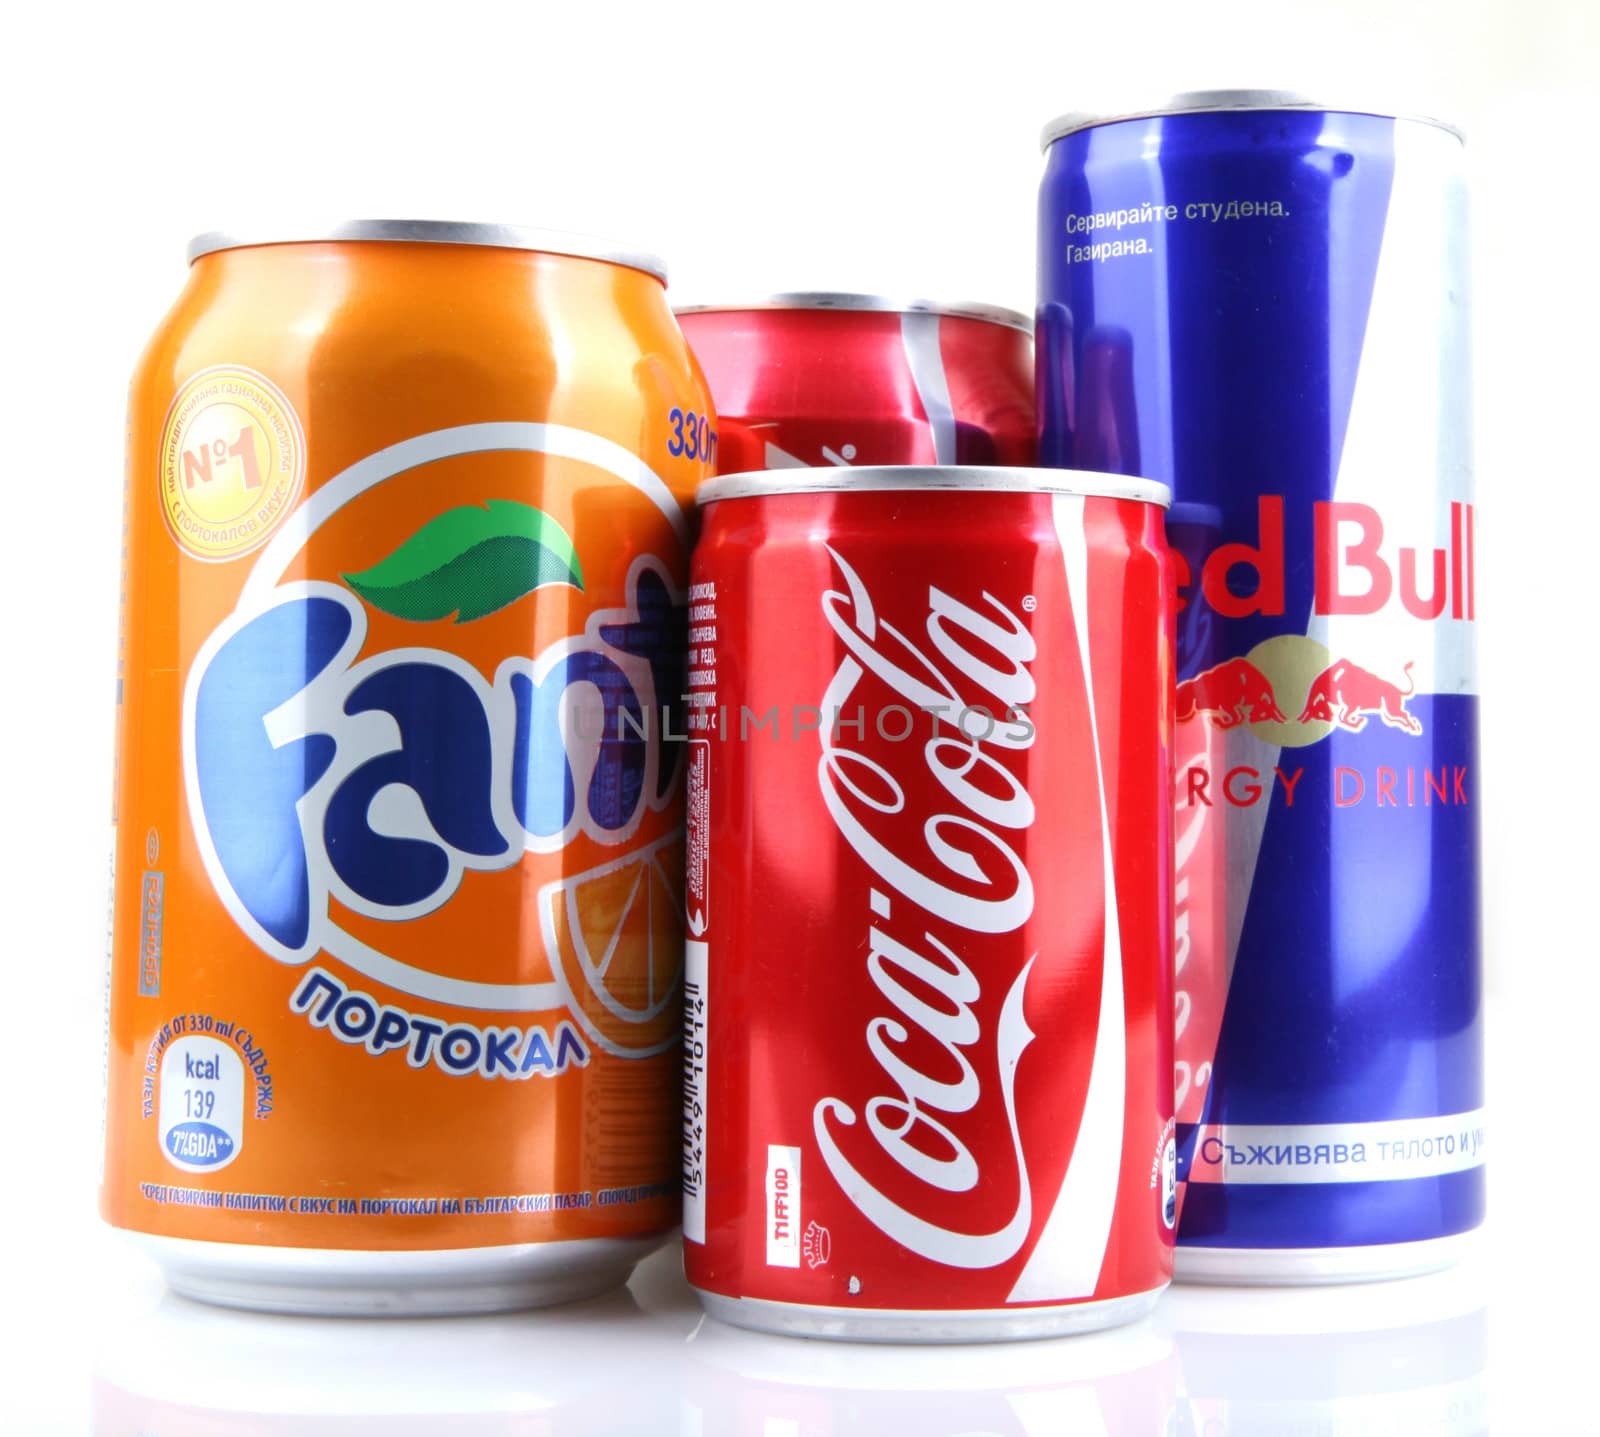 AYTOS, BULGARIA - JANUARY 23, 2014: Global brand of fruit-flavored carbonated soft drinks created by The Coca-Cola Company and Red Bull.